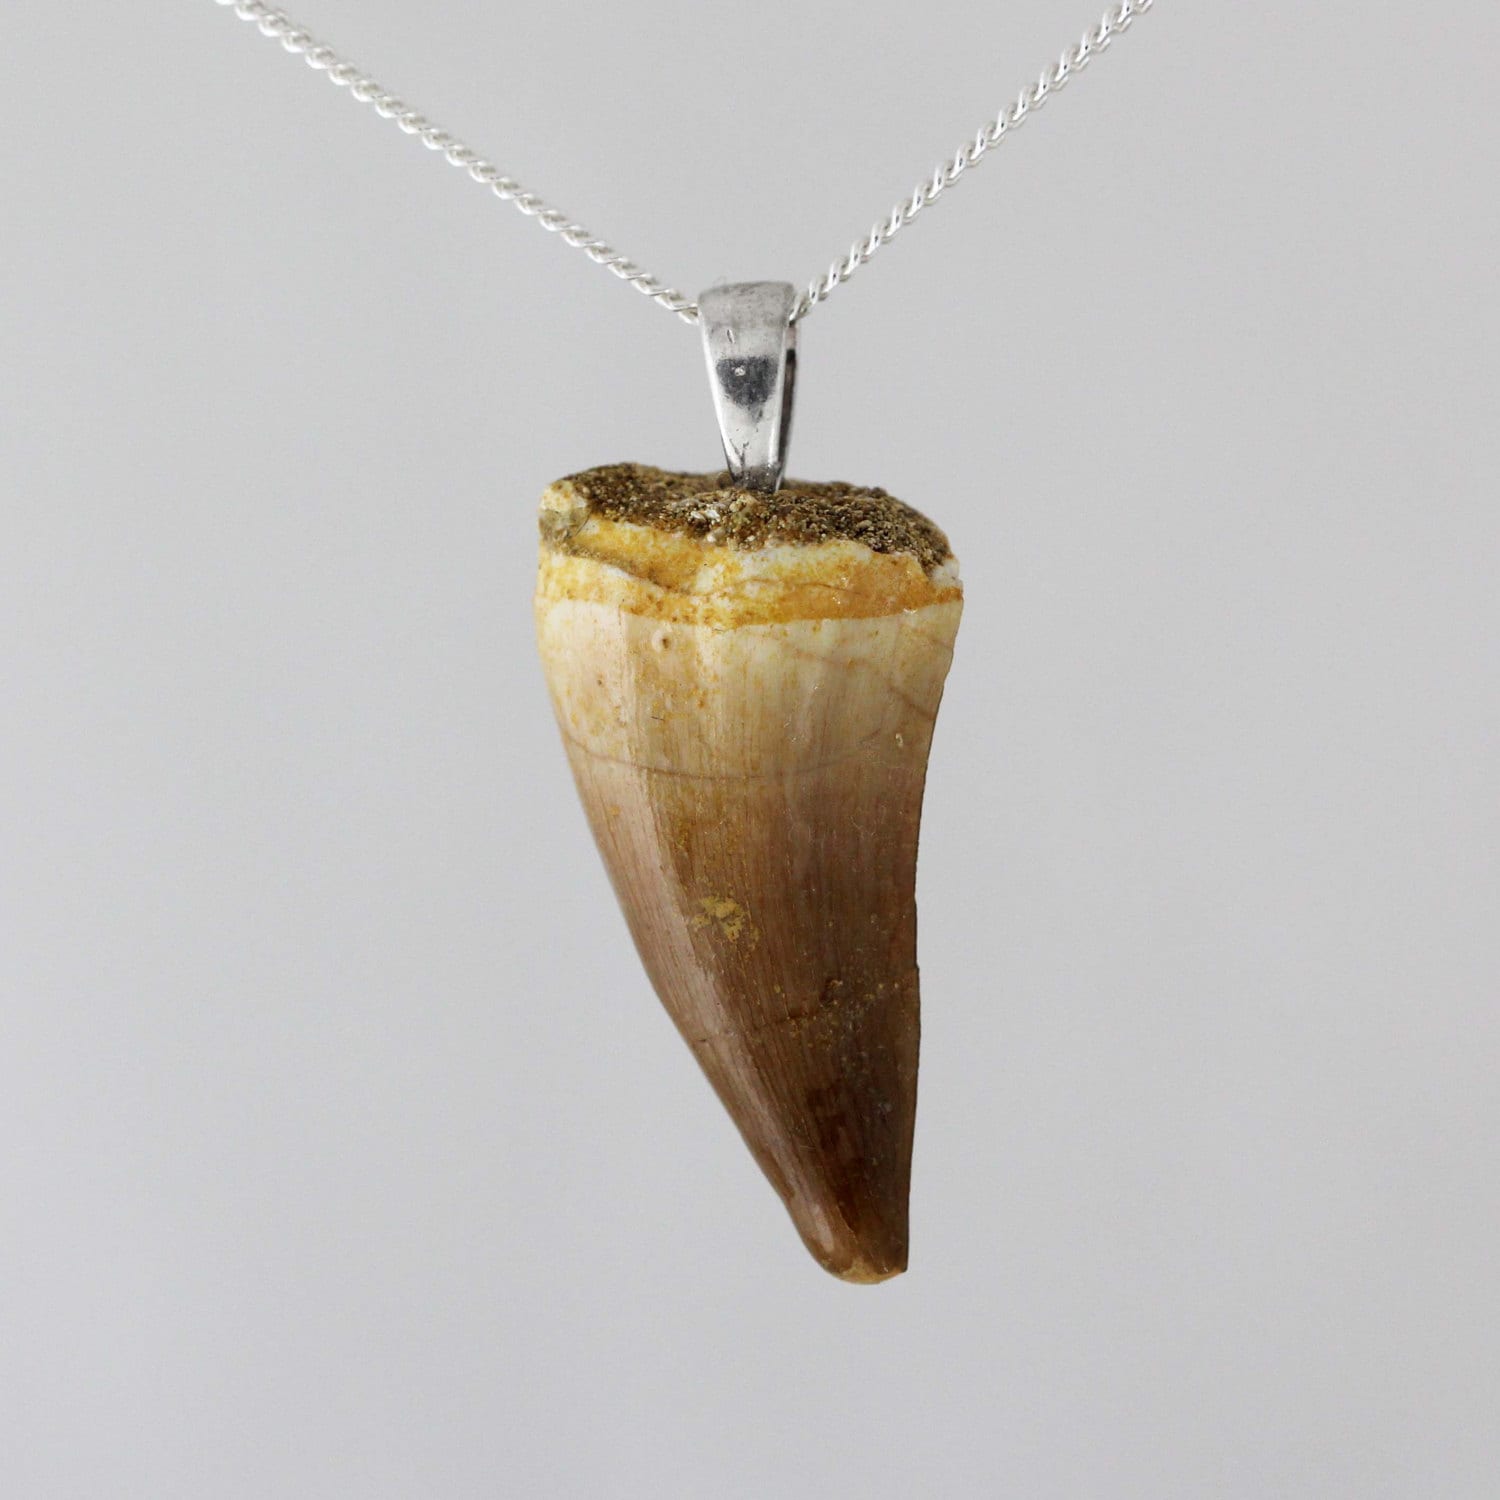 Amazon.com: ArtCreativity Prehistoric Shark Tooth Necklaces, Set of 12,  Rubber Shark Tooth with a Striking Aged Look, Shark and Dinosaur Party  Favors for Kids, Fun Goodie Bag Fillers for Boys and Girls :